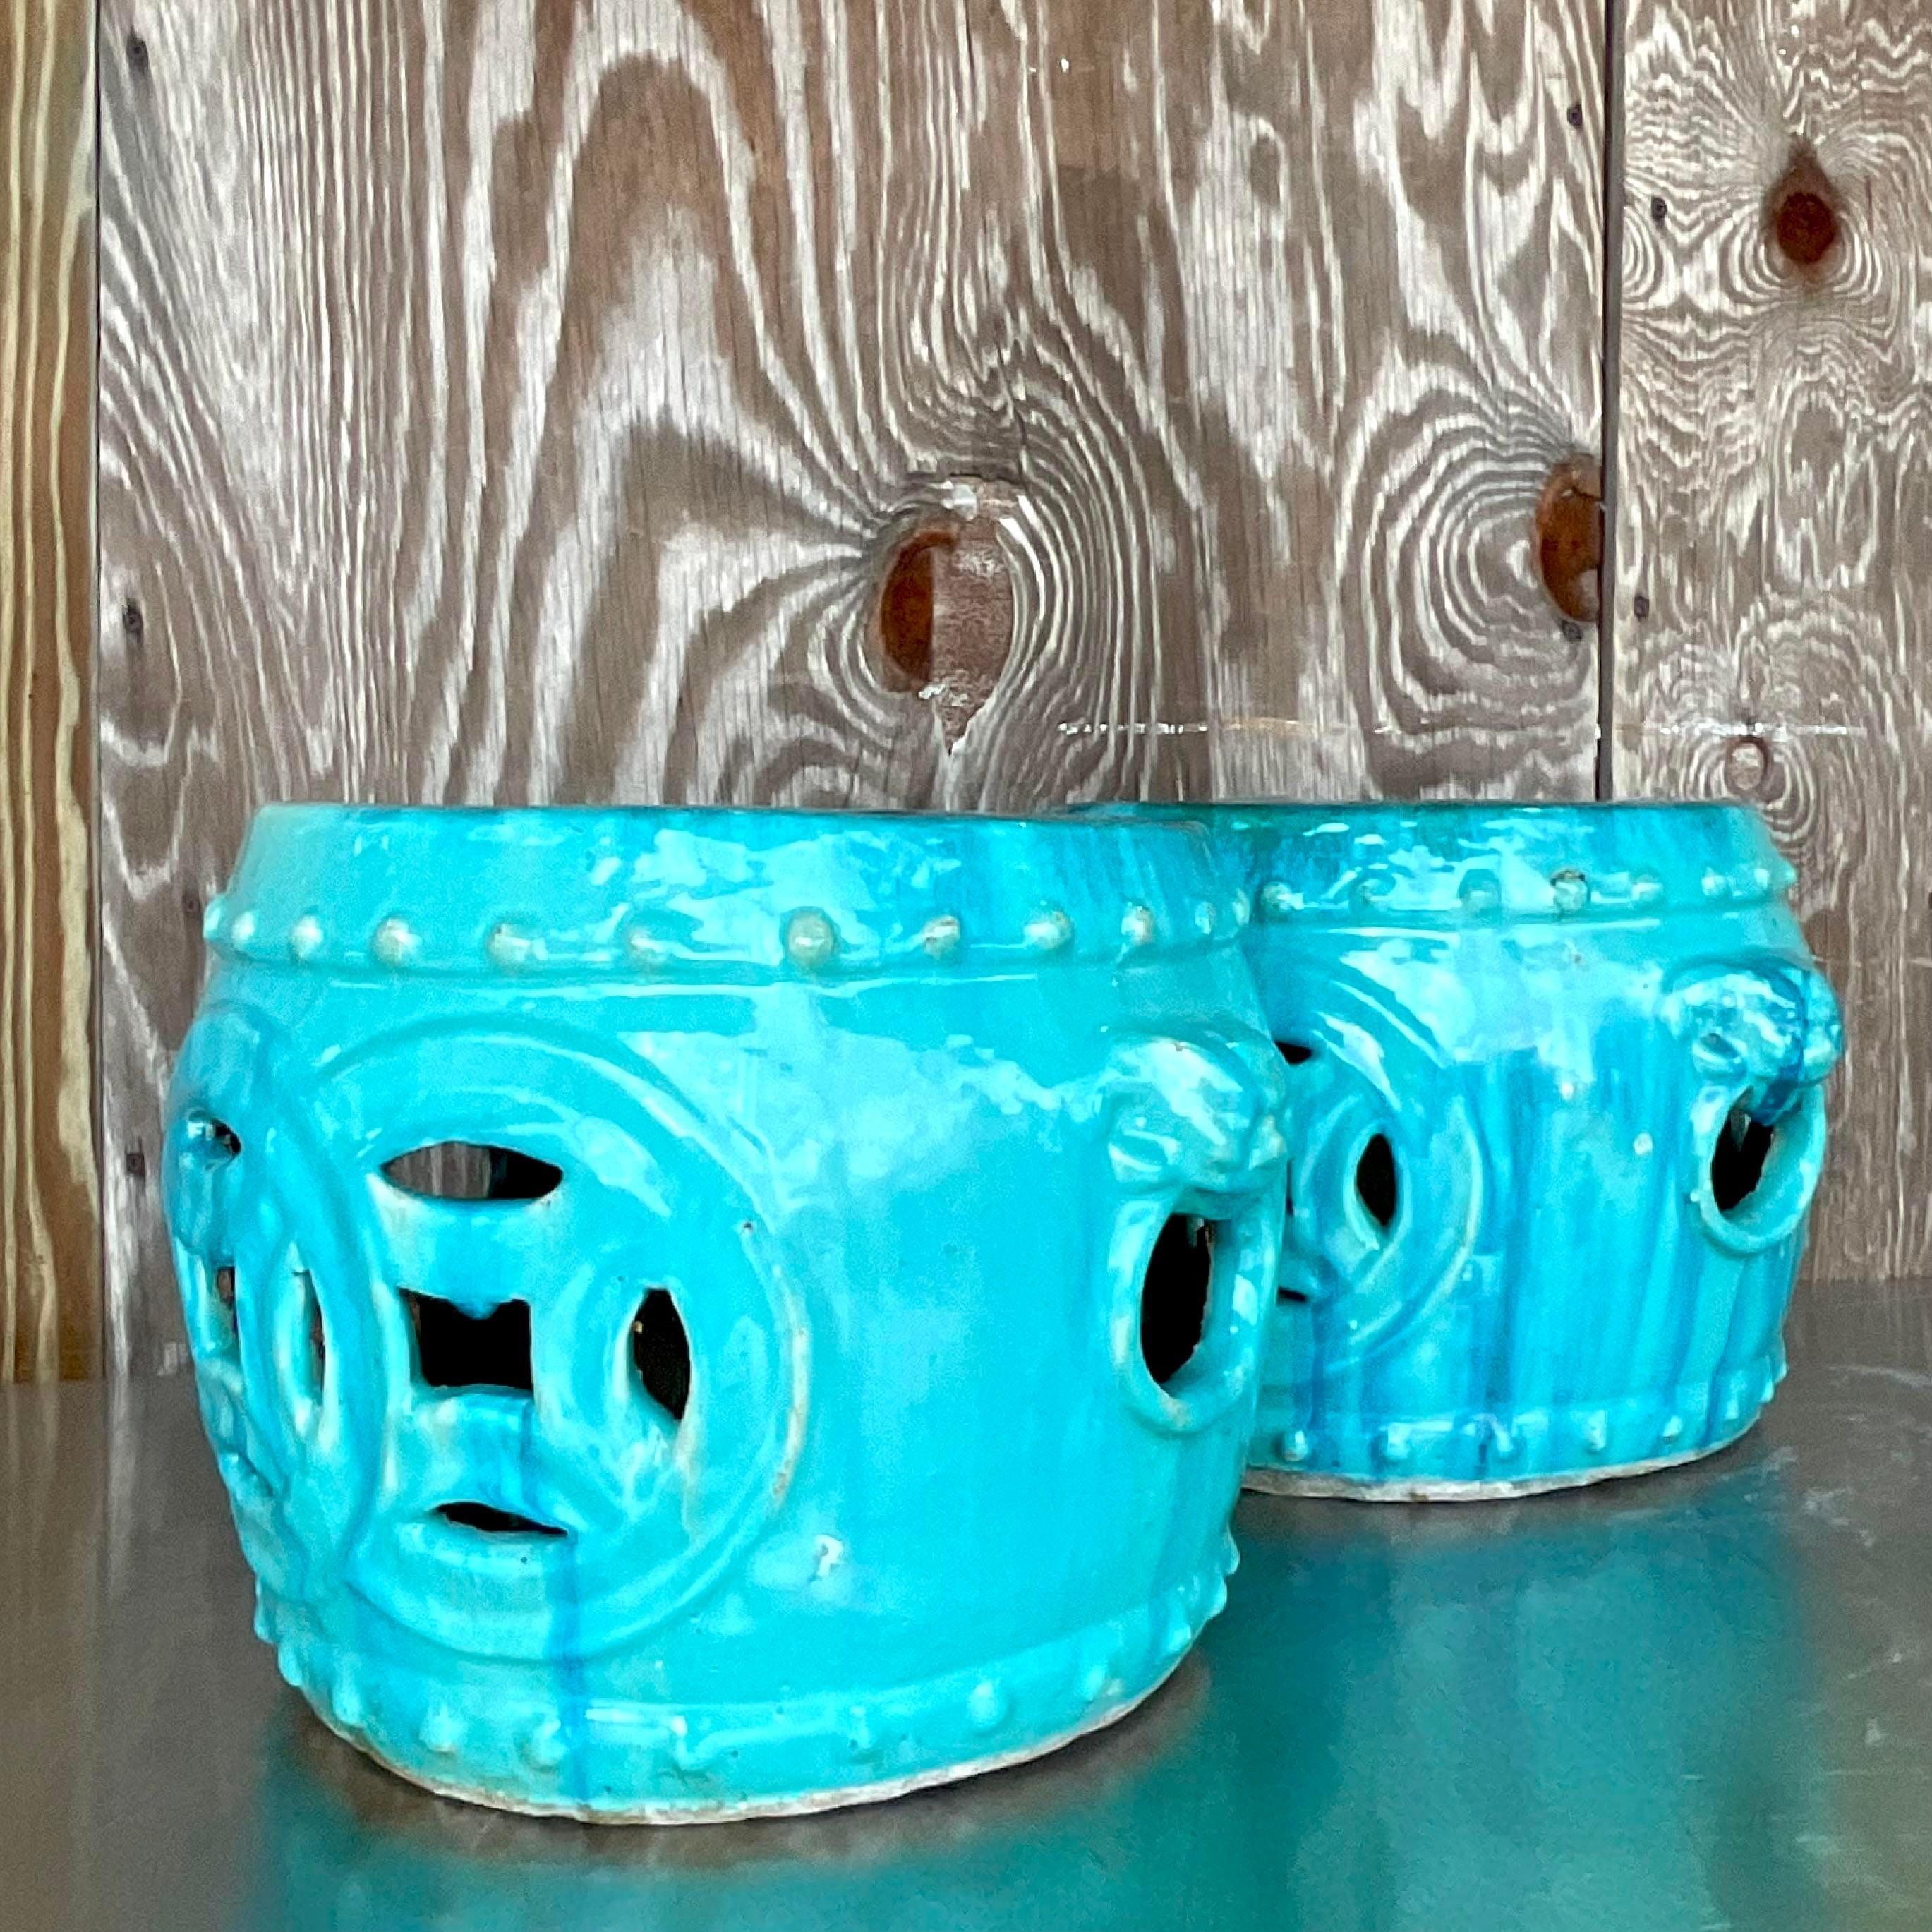 A fabulous pair of vintage low stools. A chic glazed ceramic finish in a brilliant blue/green color. A beautiful open medallion design. Acquired from a Palm Beach estate.